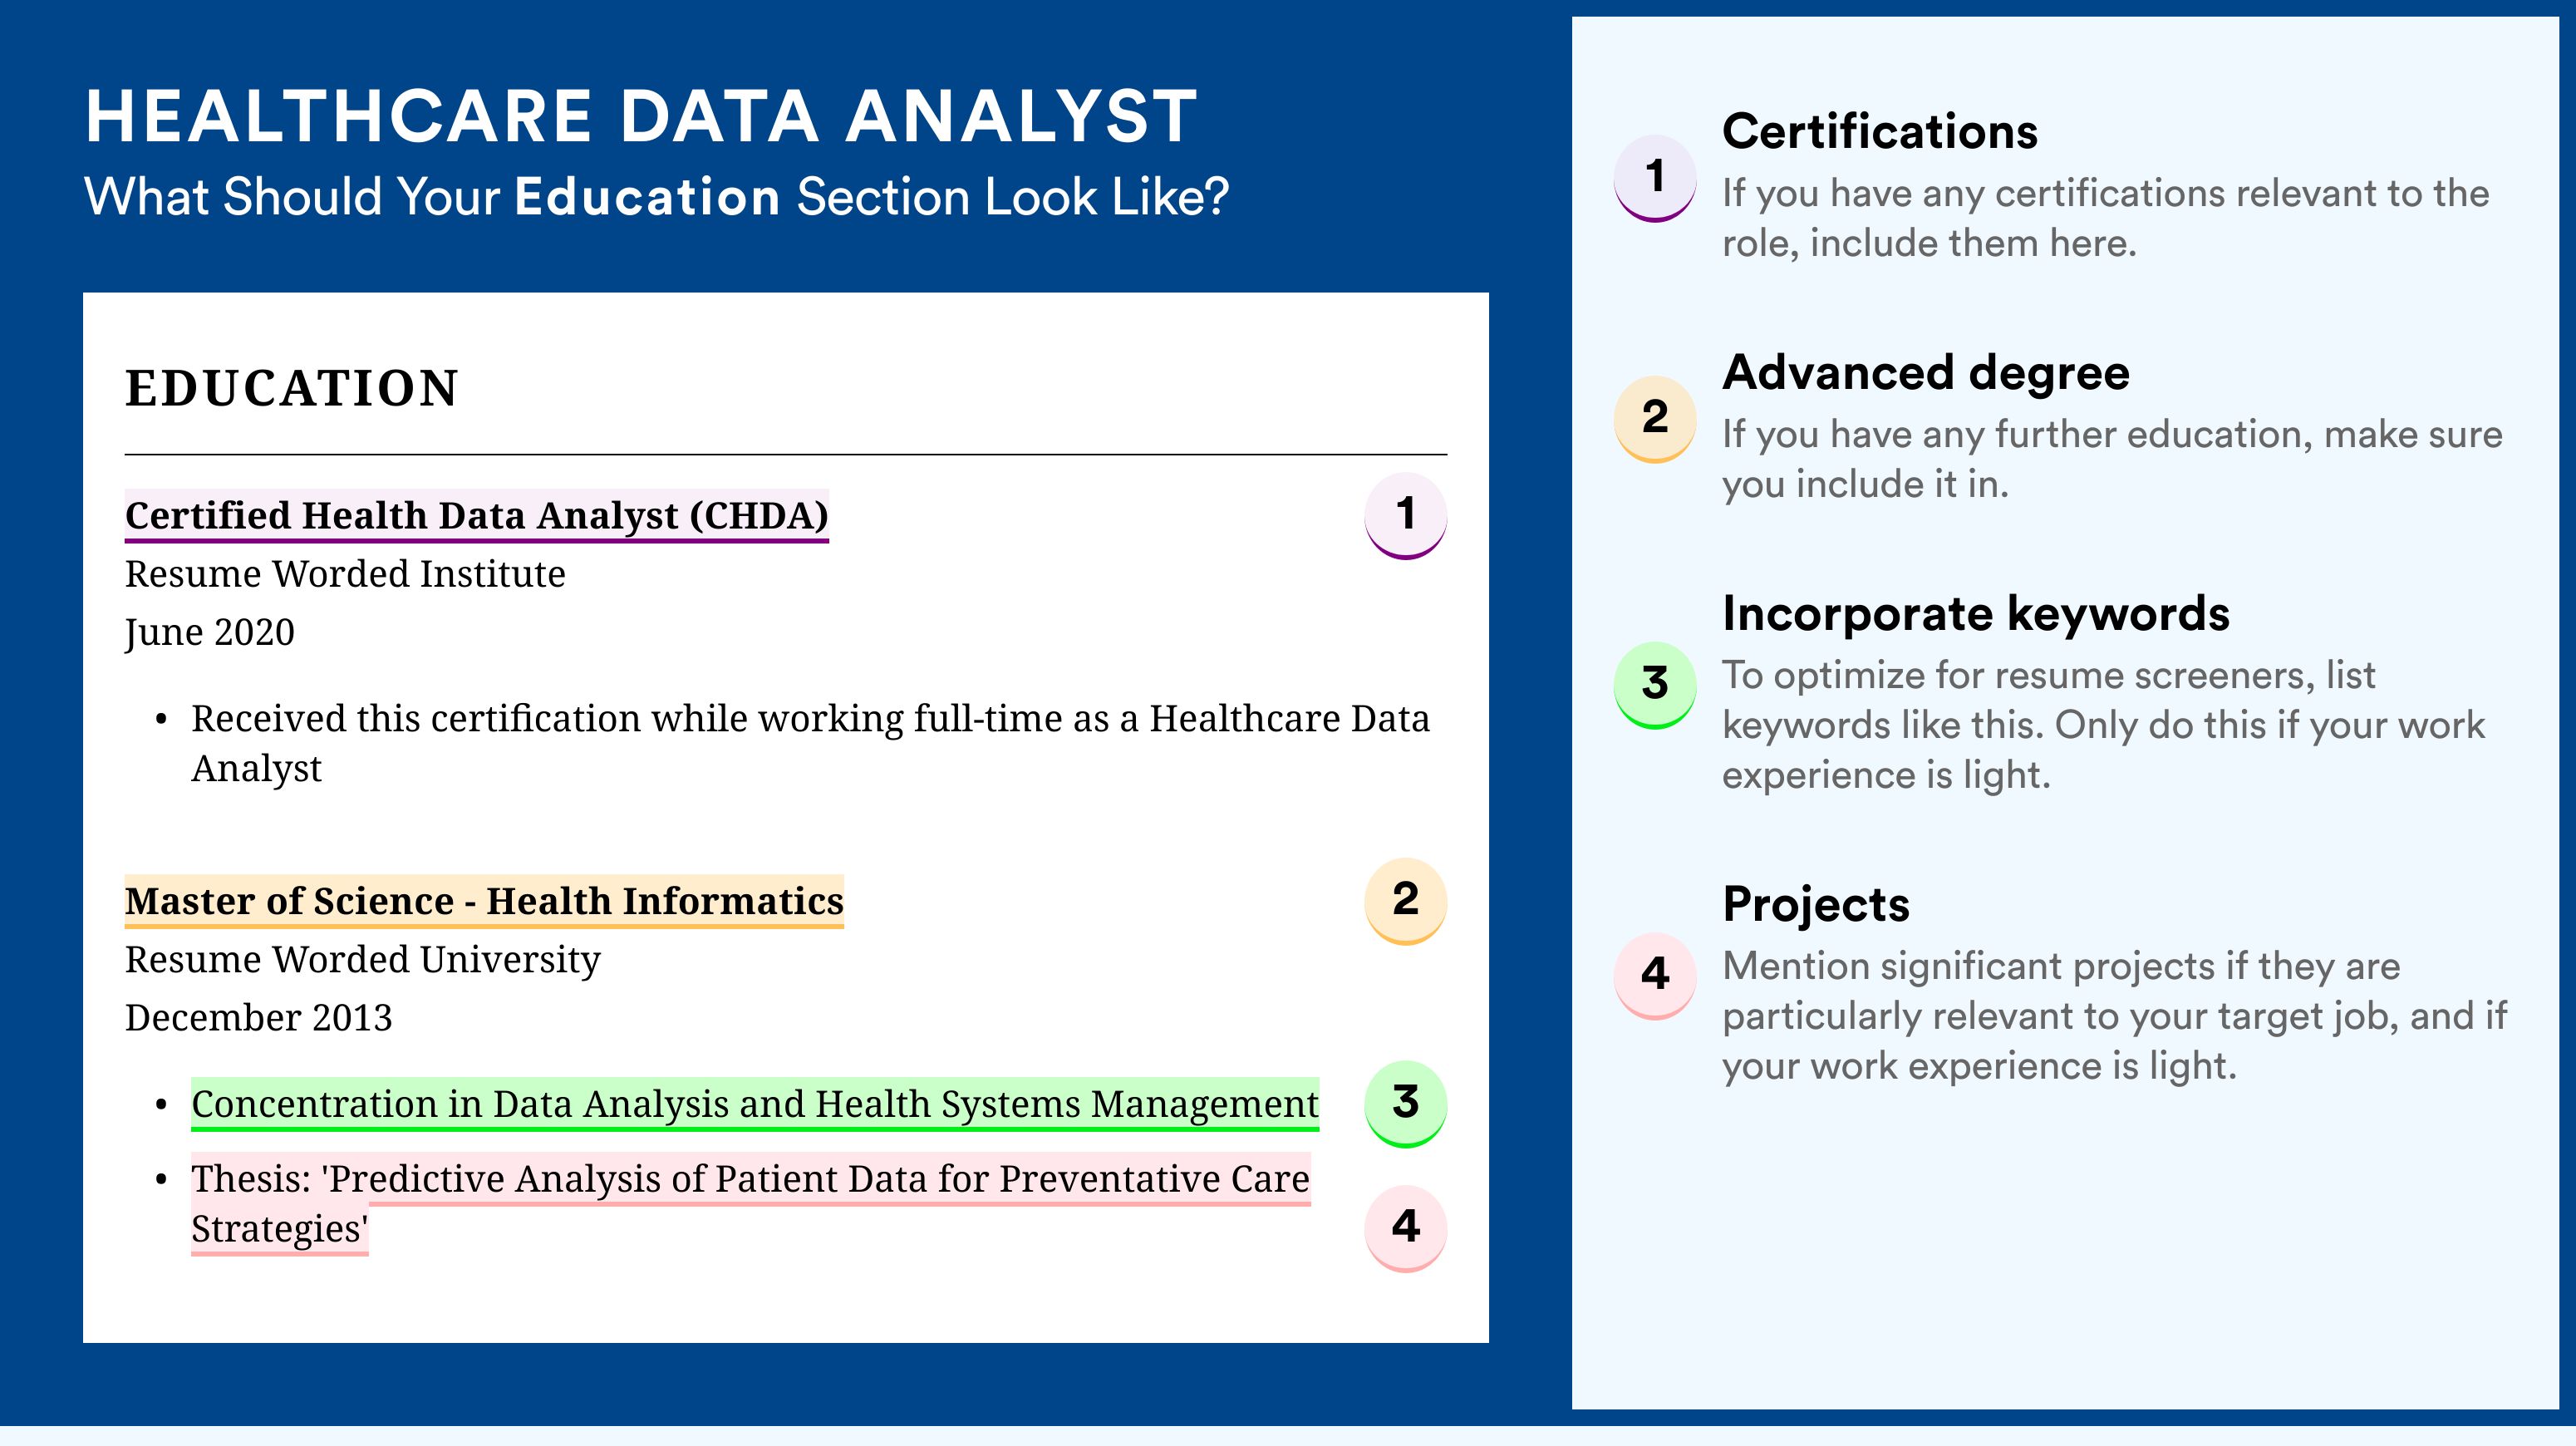 How To Write An Education Section - Healthcare Data Analyst Roles